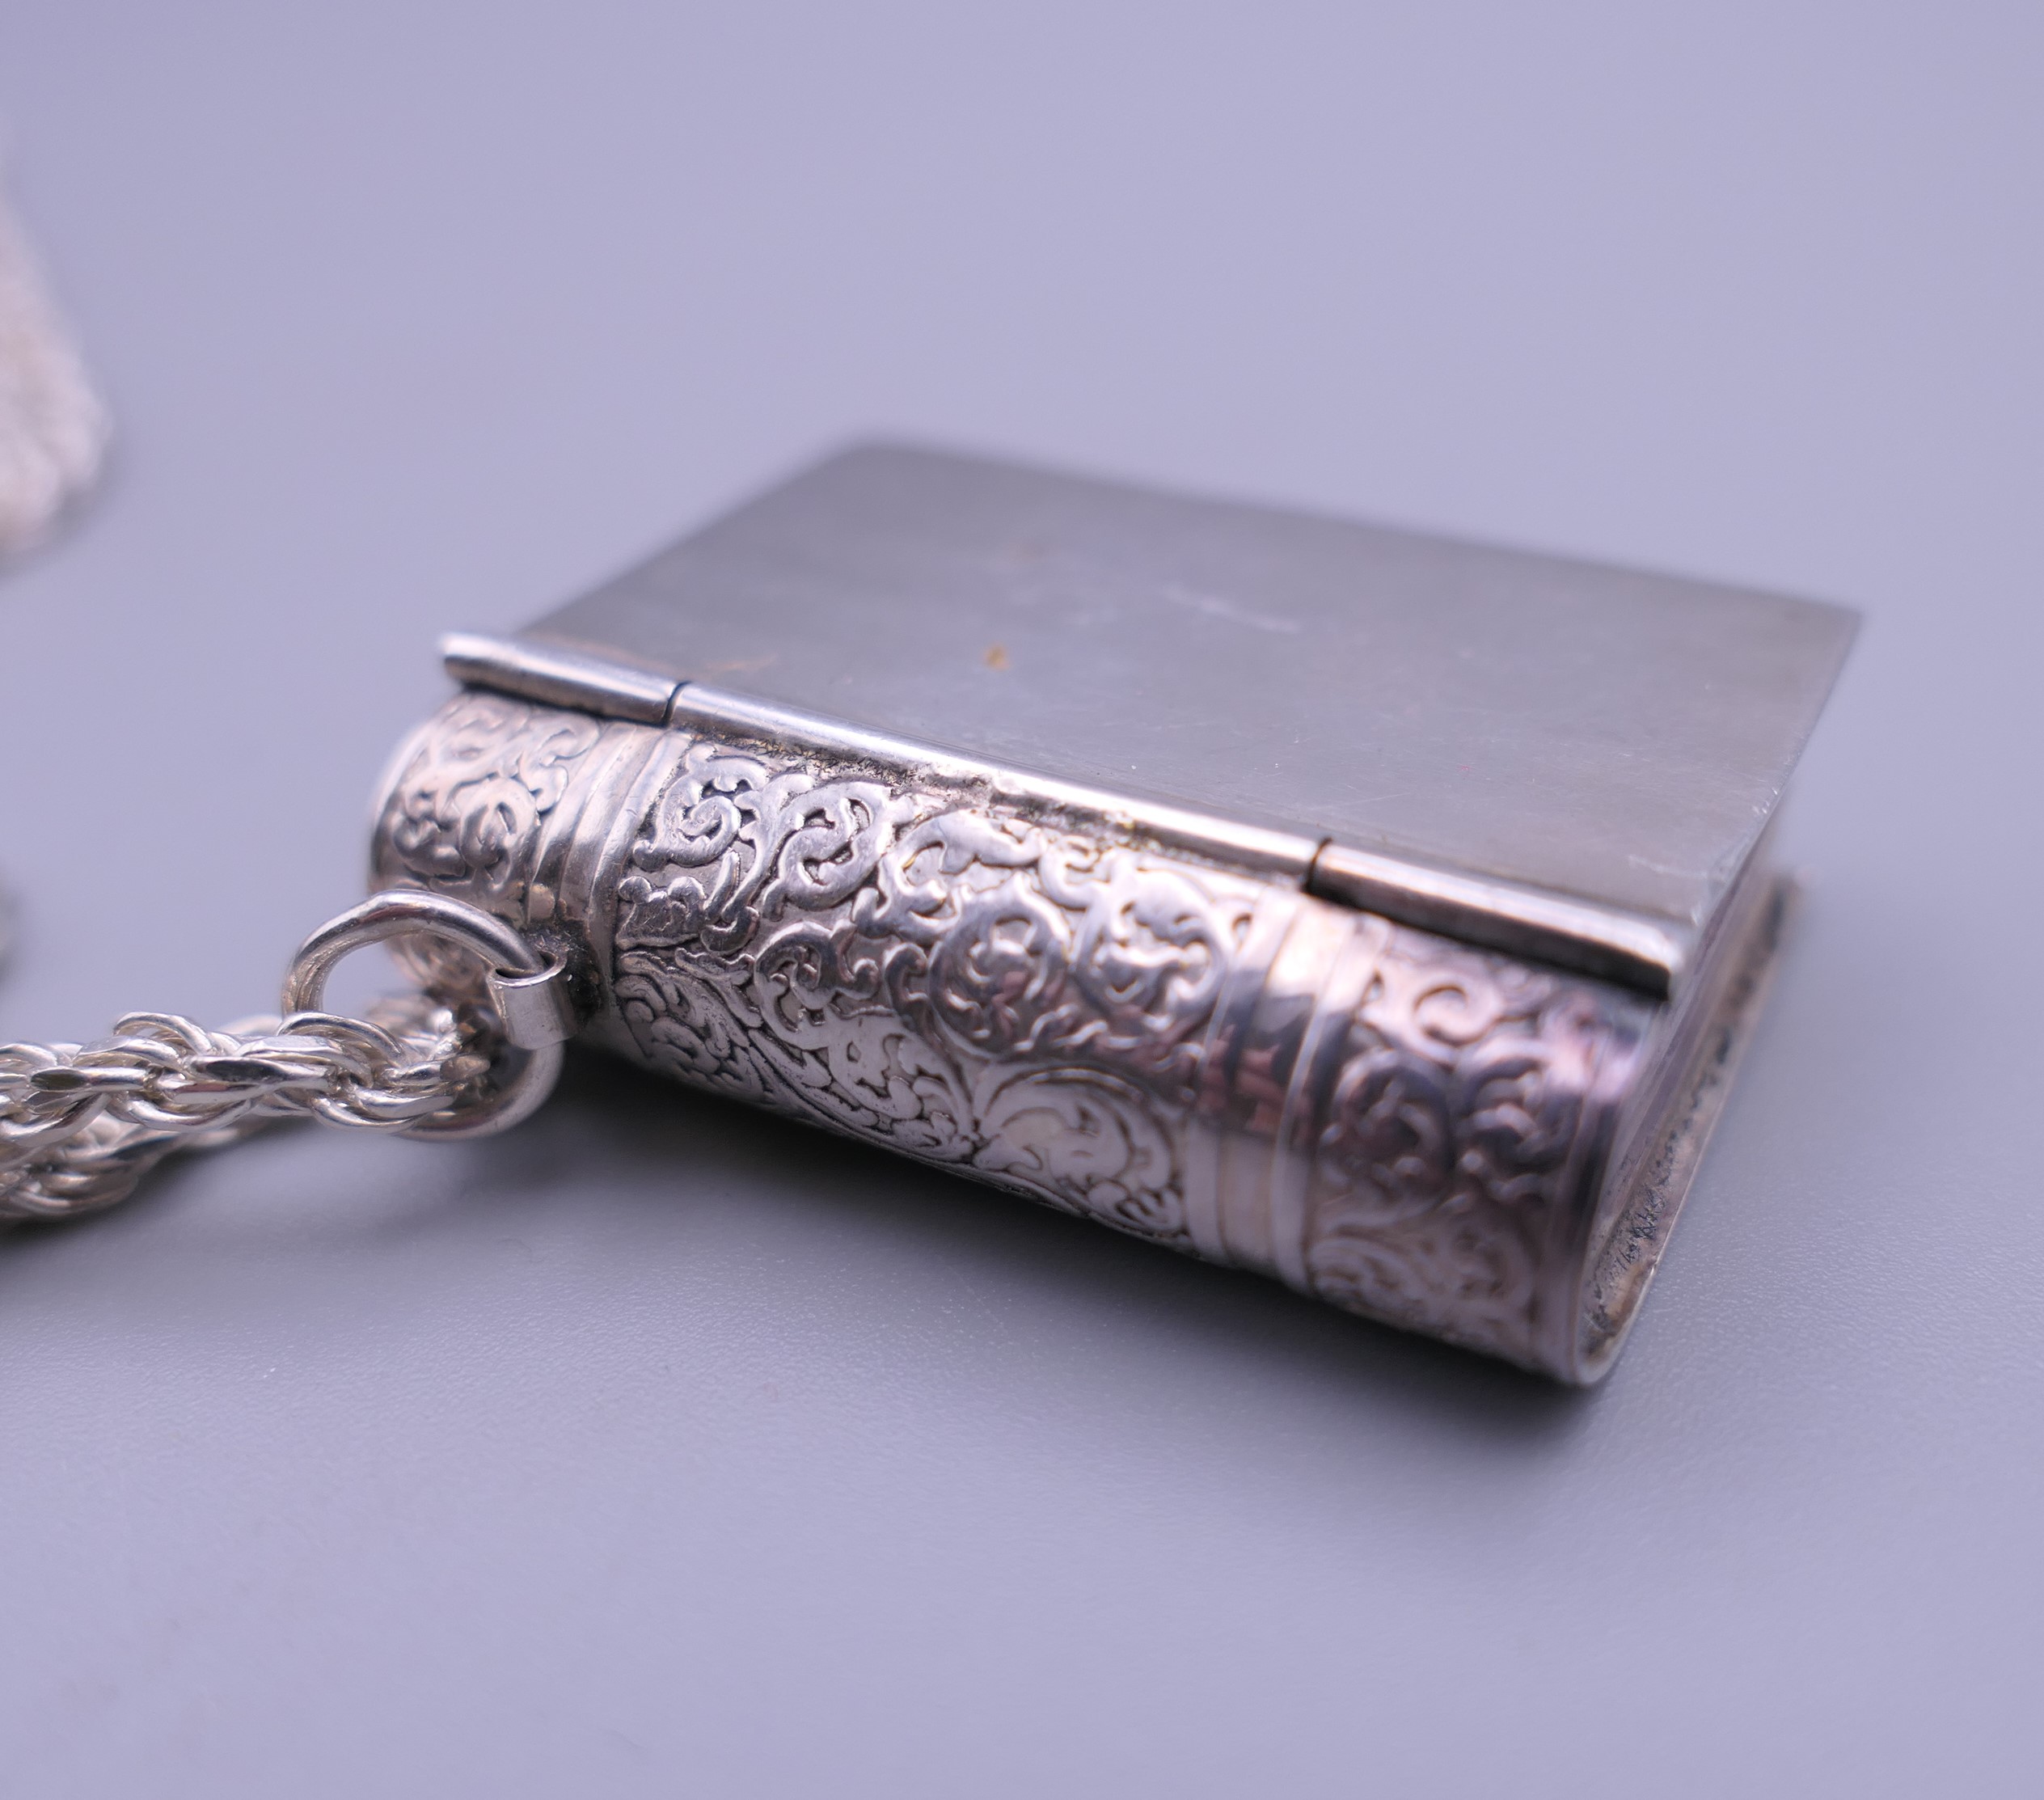 A book form pendant on chain. The pendant 3.5 cm high. - Image 4 of 6